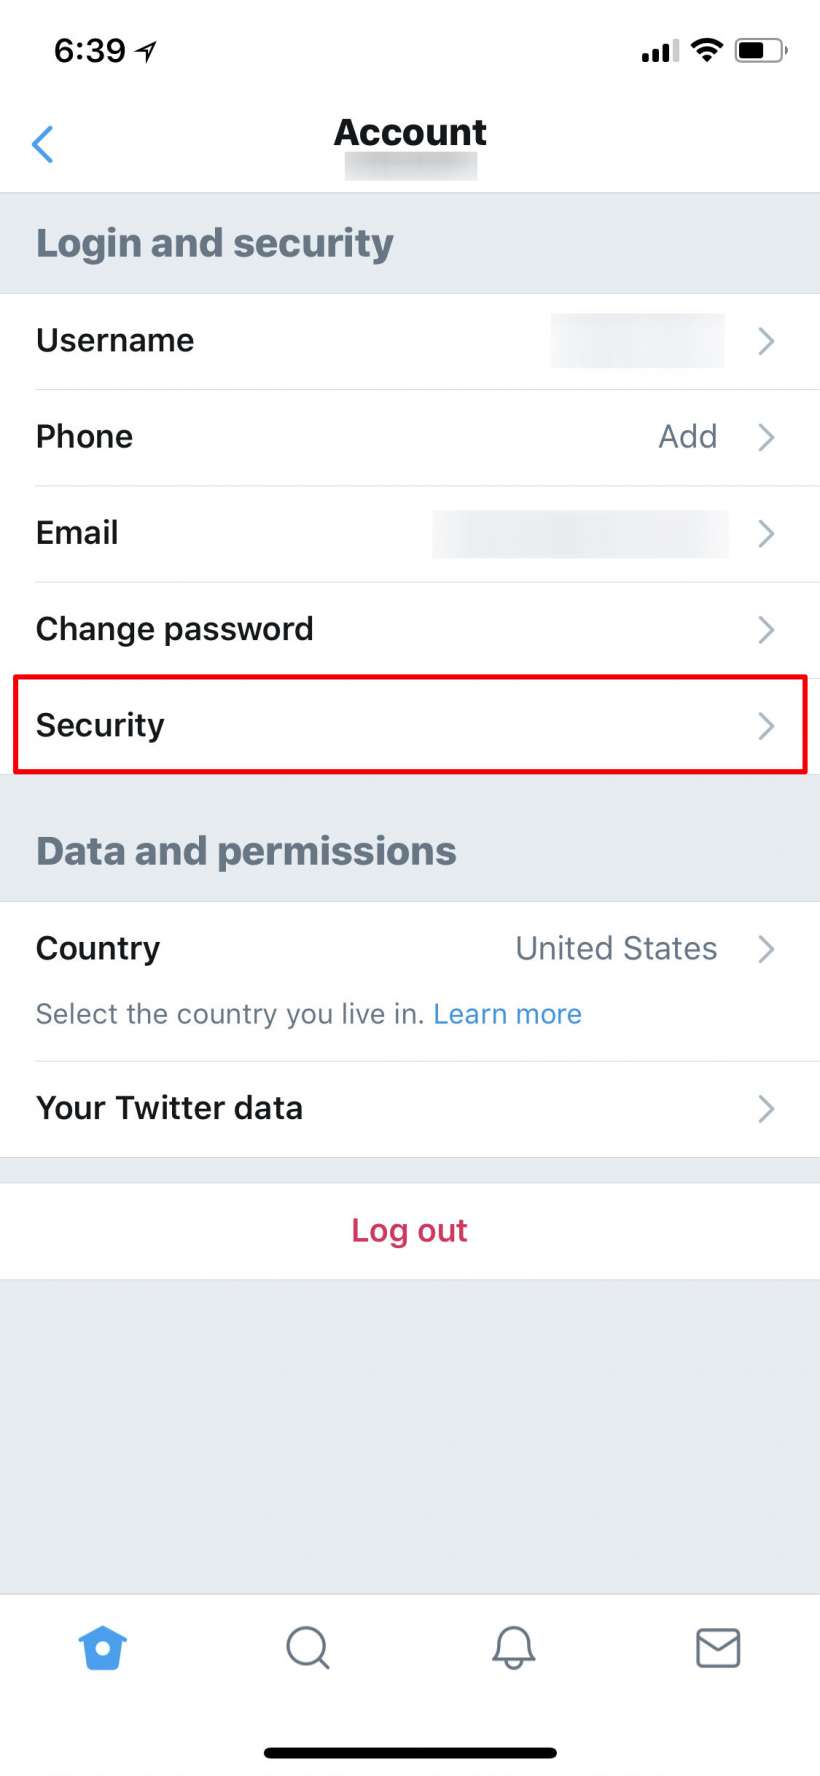 How to change your Twitter password and activate two factor authentication 2FA.